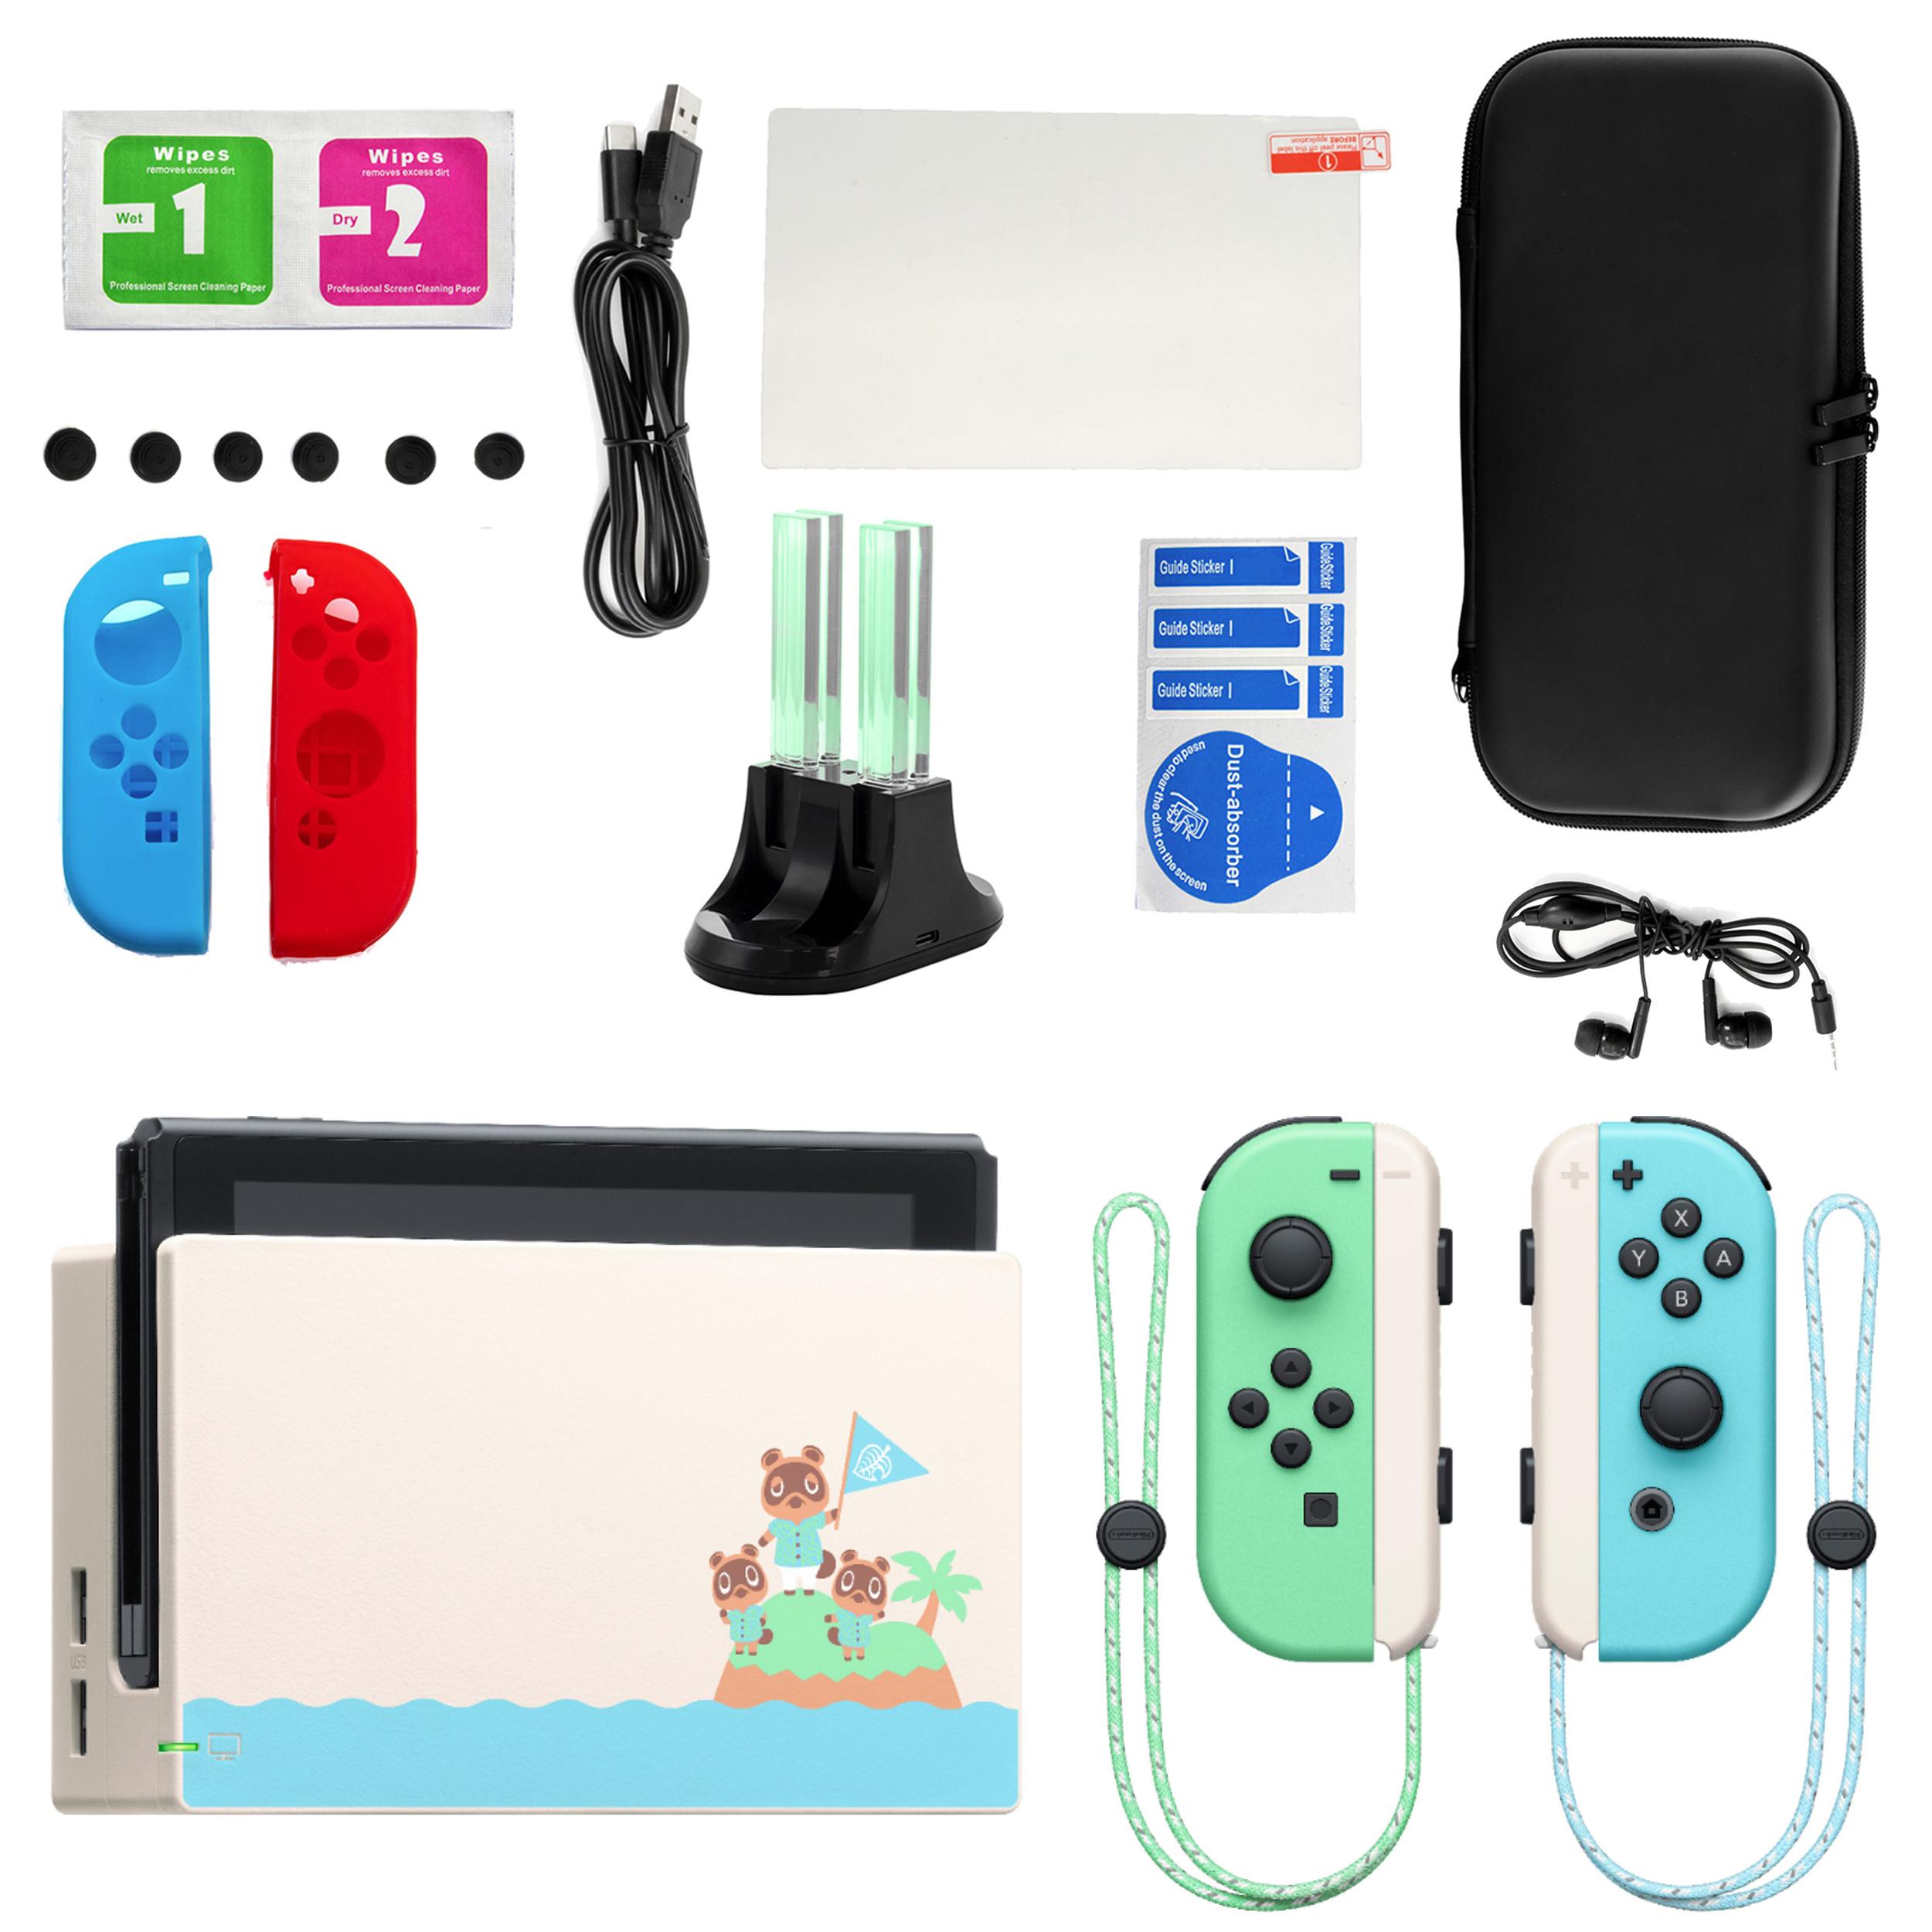 Nintendo Switch Animal Crossing with Accessories for $299.99 Shipped